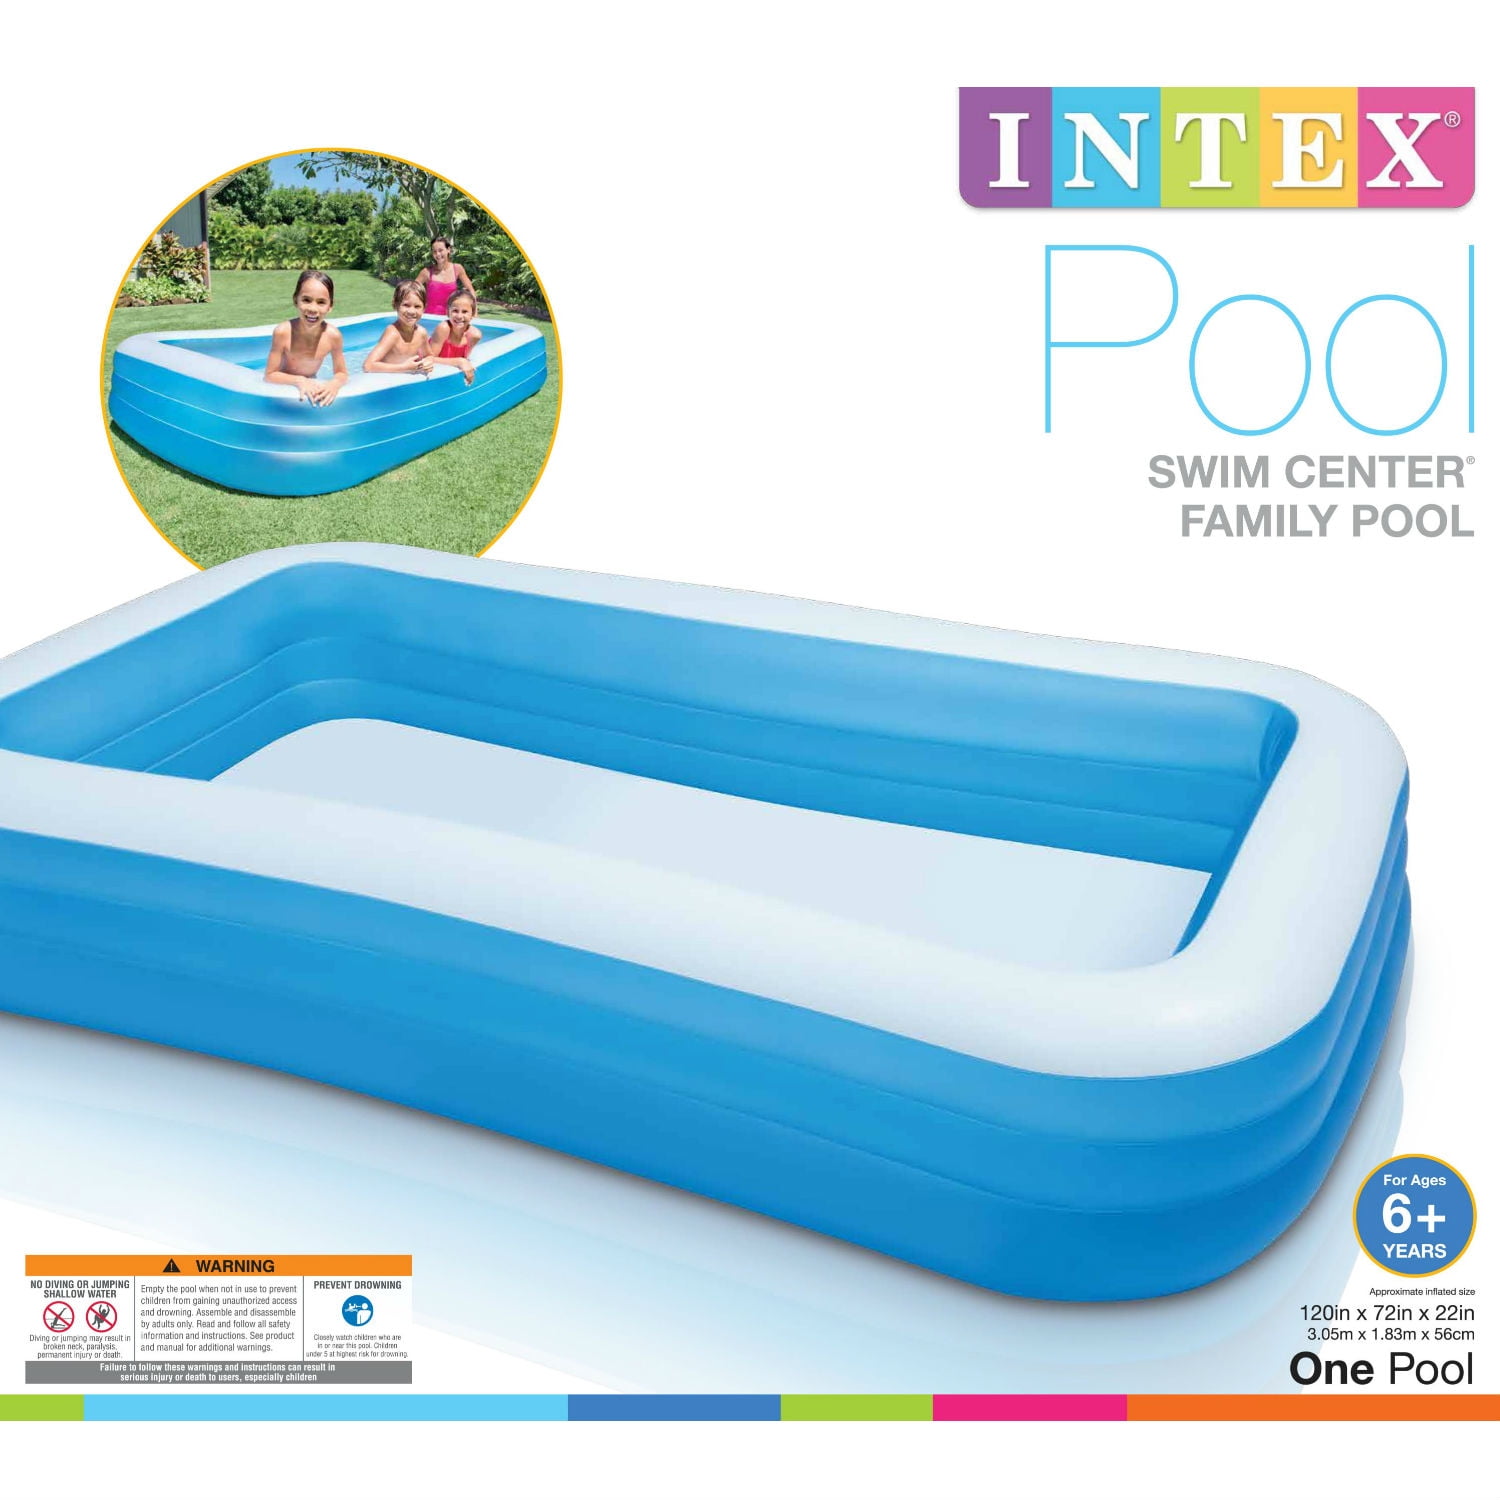 45CM IGEMY Rectangular Inflatable Family Pool Inflatable Swimming Pool Swim Center Family Large Inflatable Pool Game Pool Toys 125 Blue 85 